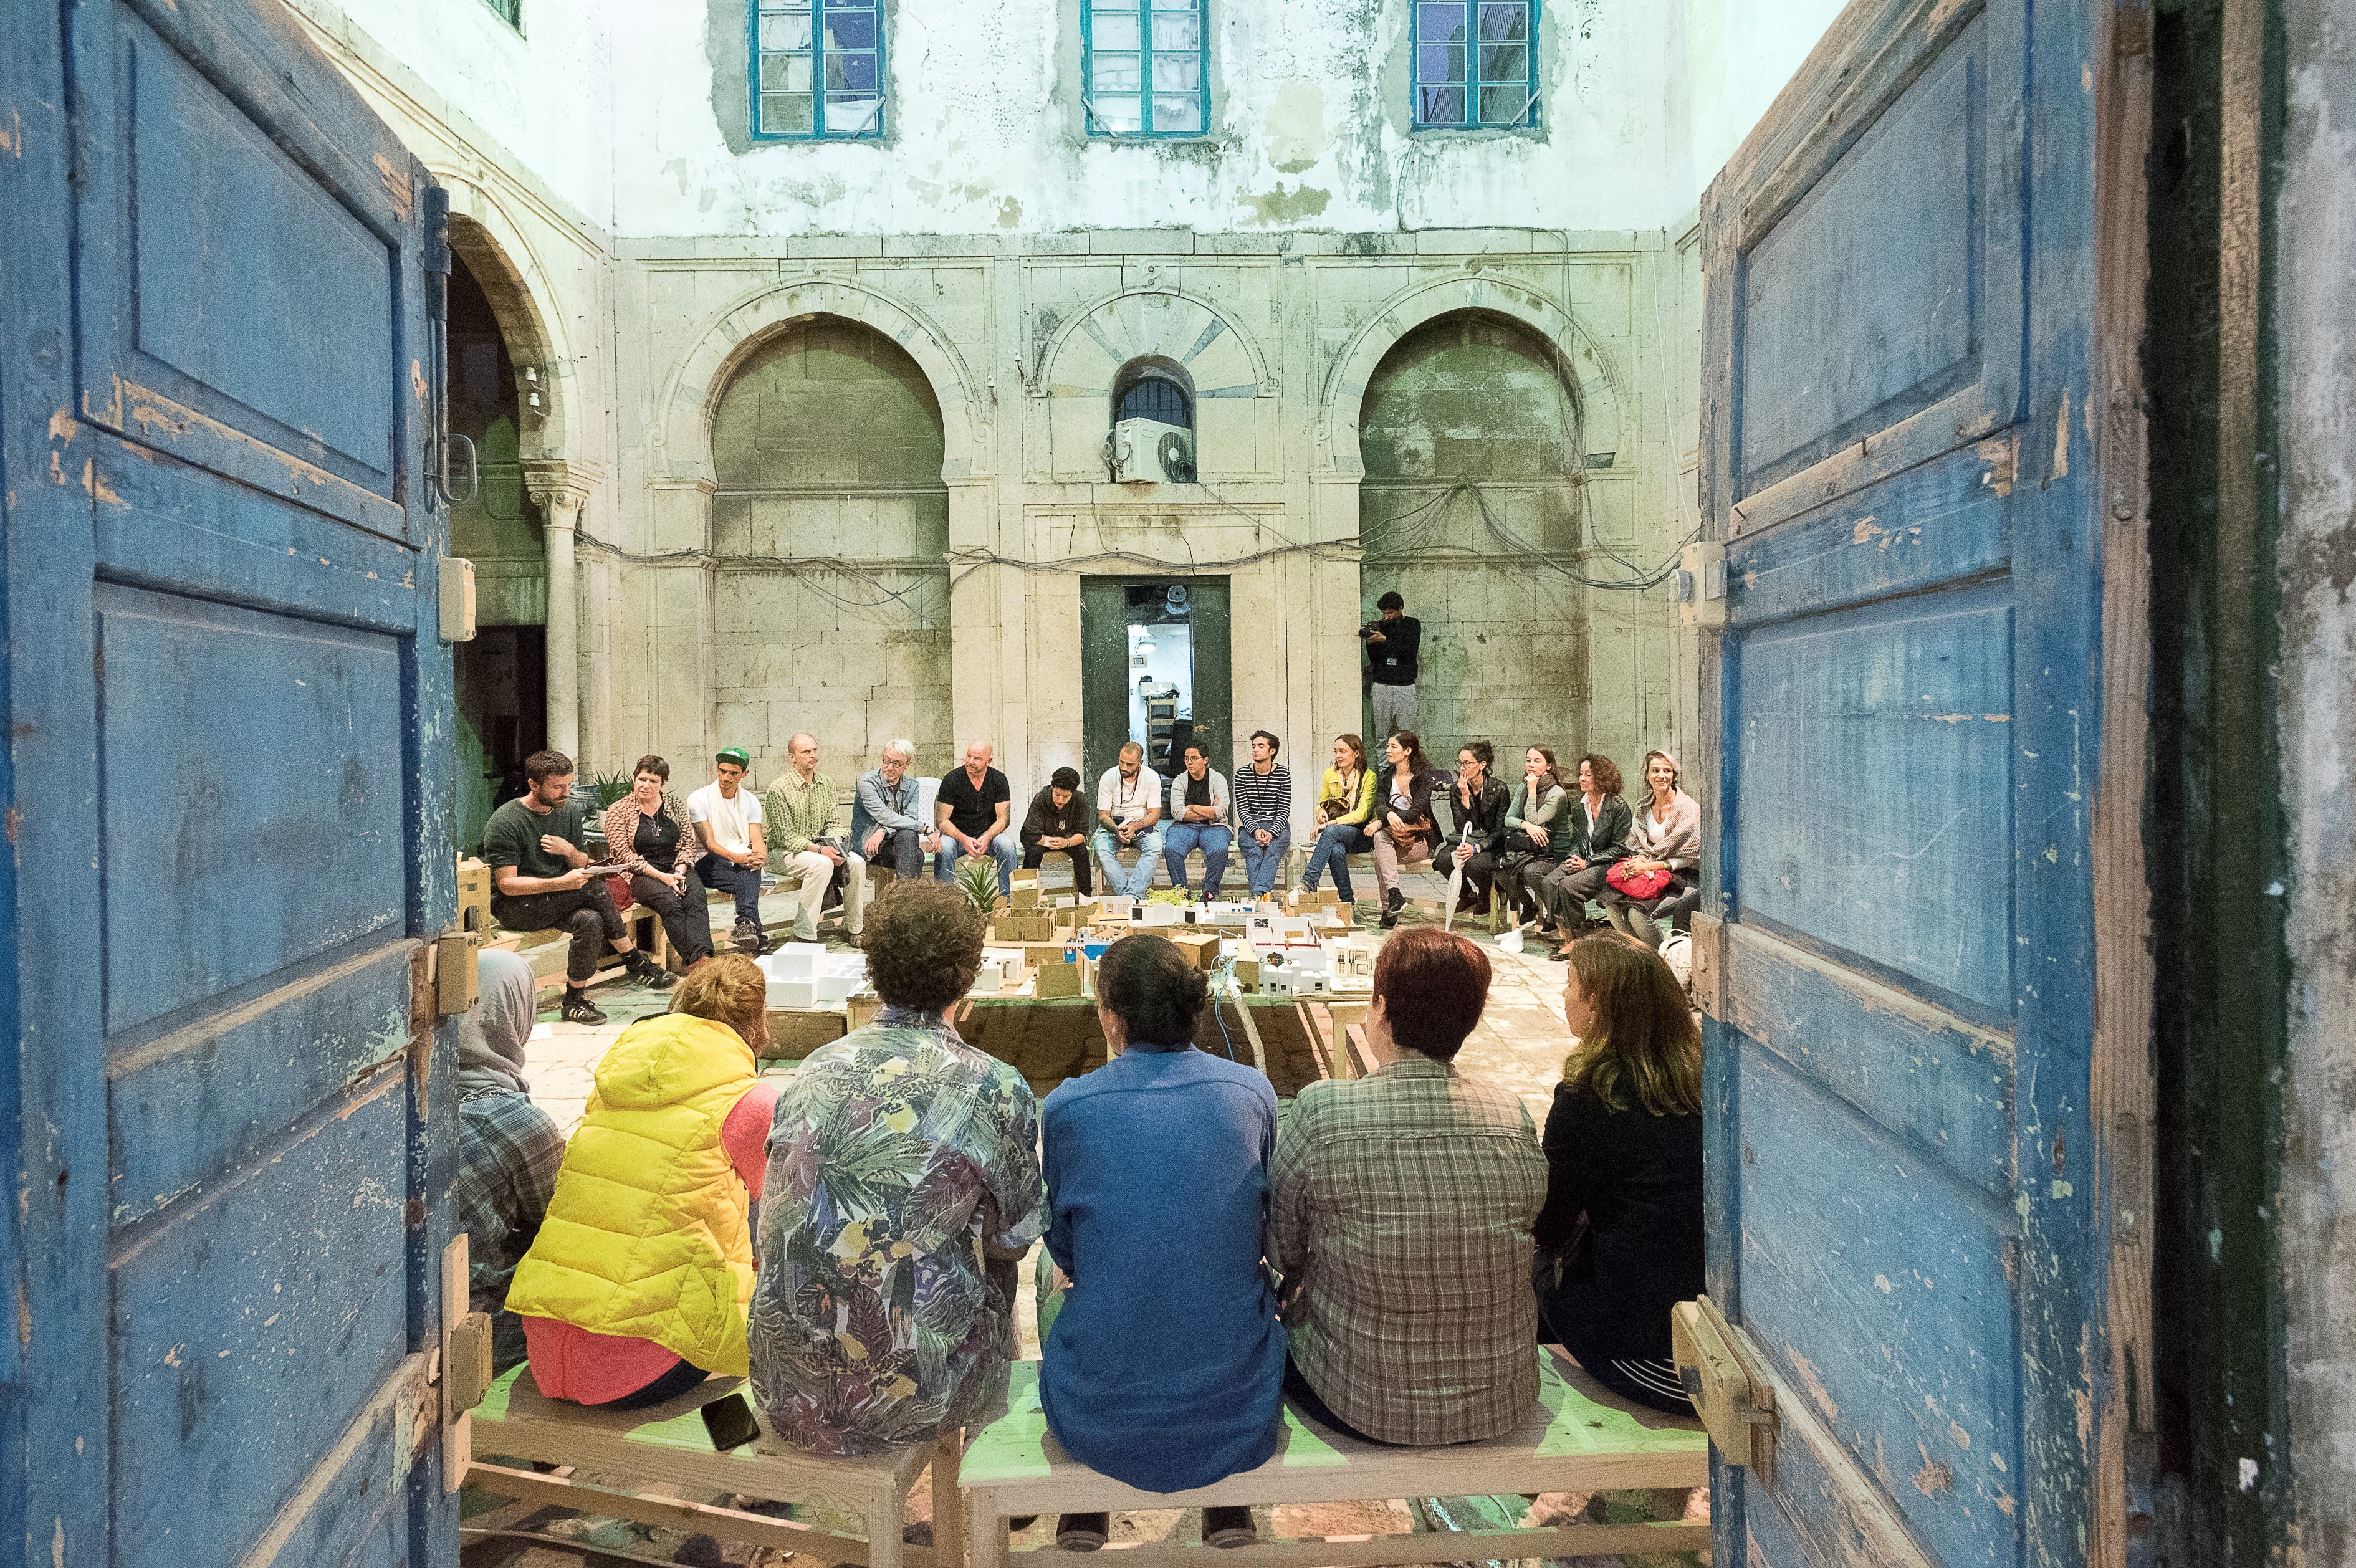 A group of young people sit in a circle in the inner courtyard of a building during the Dream City festival in Tunis.